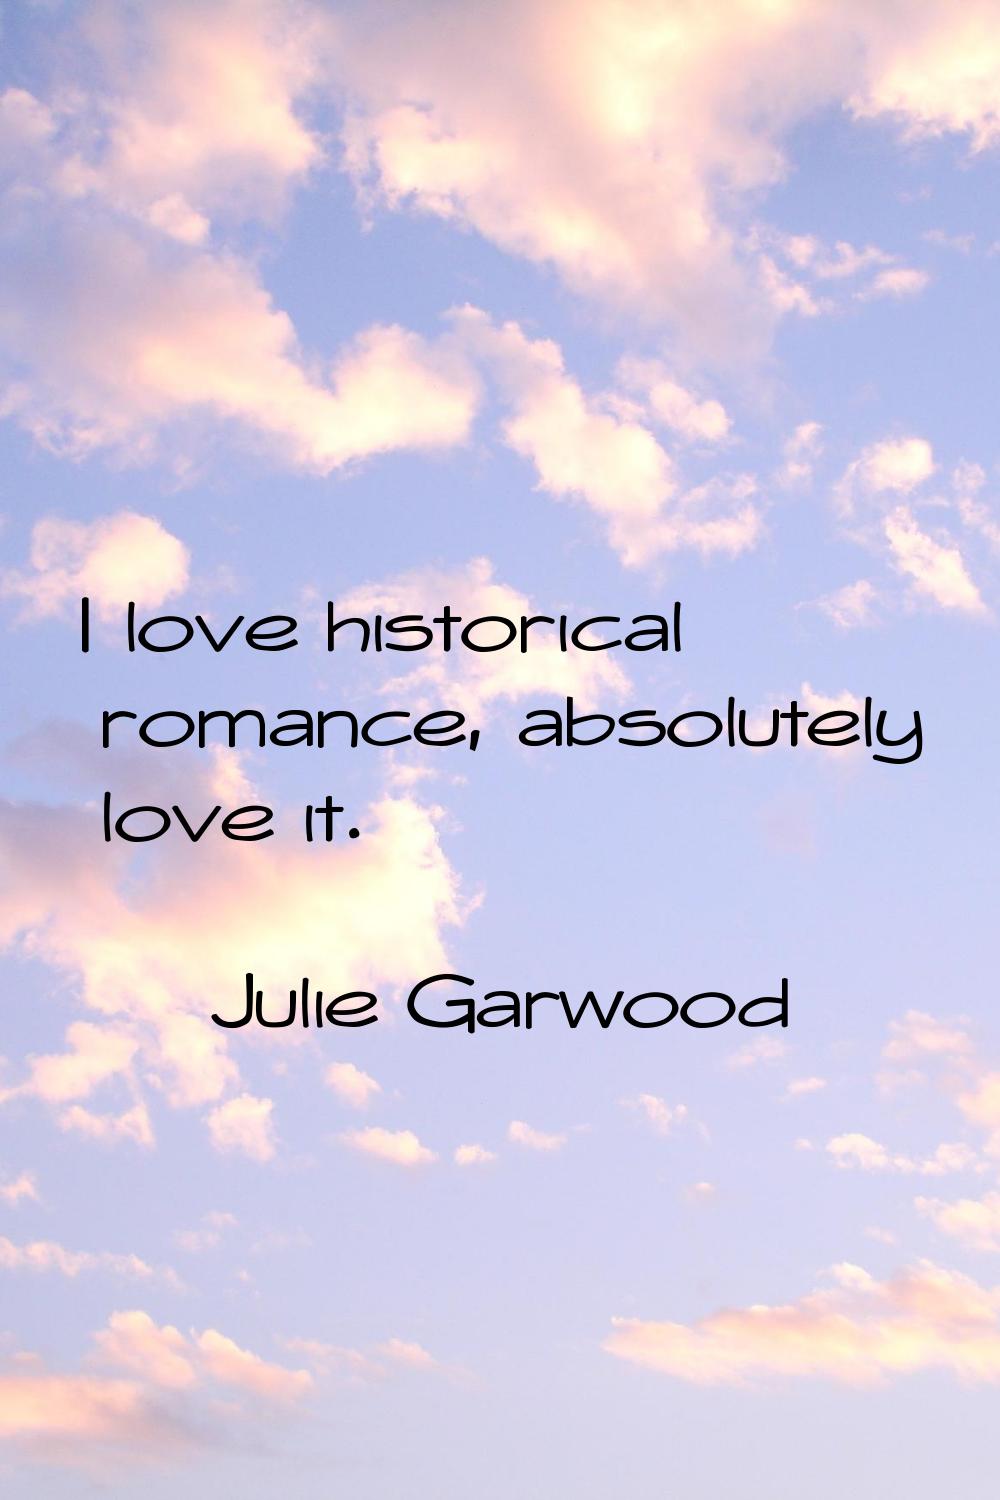 I love historical romance, absolutely love it.